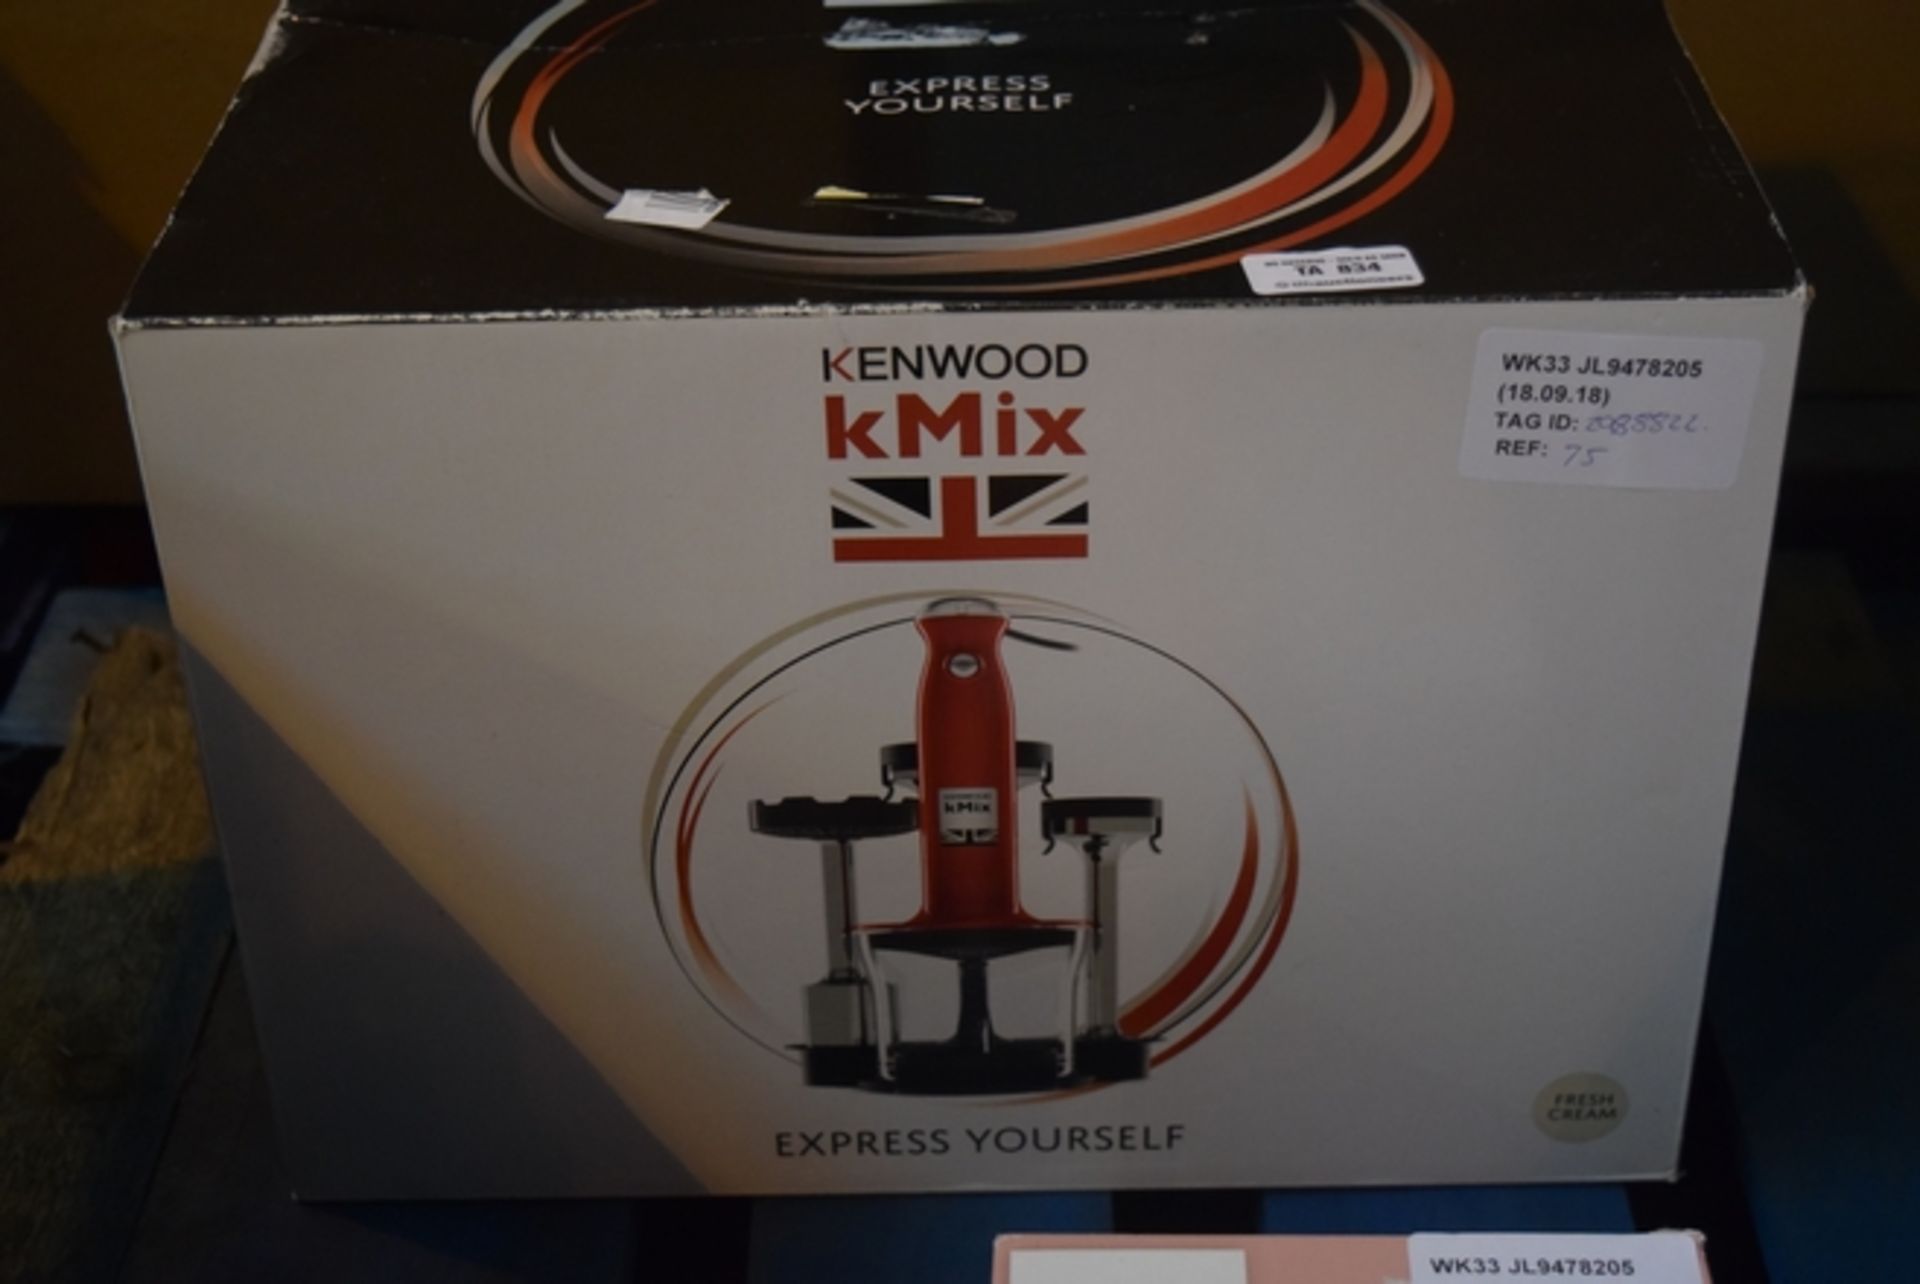 1X BOXED KENWOOD K MIX EXPRESS YOURSELF WHISK 800W RRP £75 (298822) (18.09.18)(VIEWING AVAILABLE)